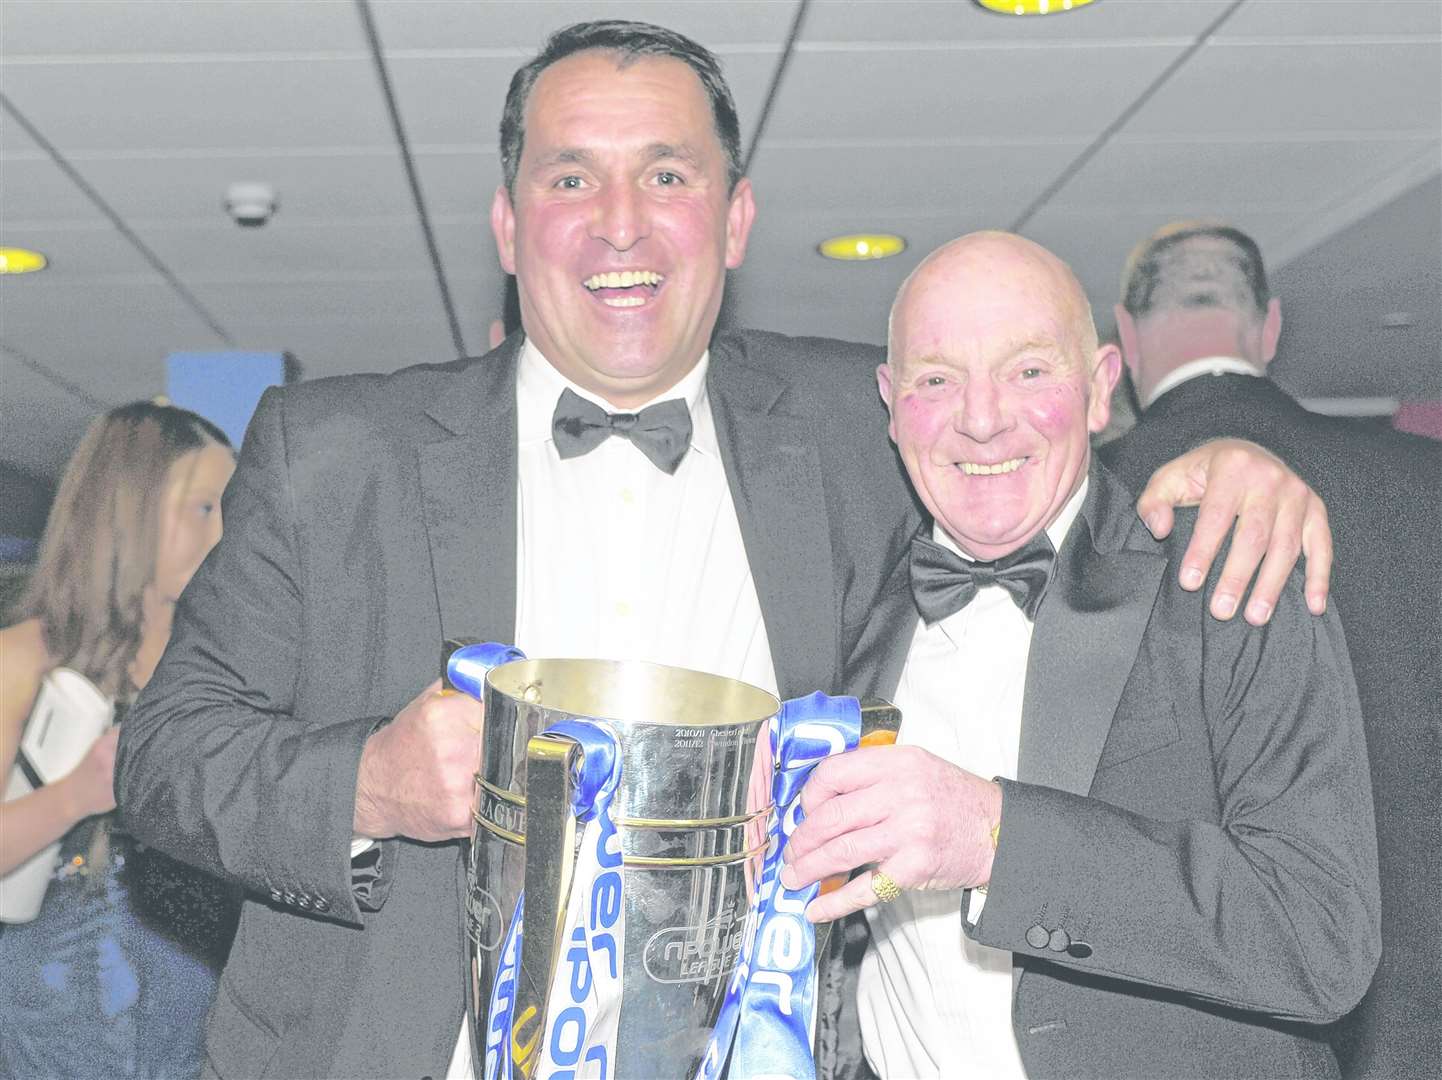 Malcolm Stedman celebrates winning the League 2 title in 2012/13 with then boss Martin Allen. Picture: Barry Goodwin